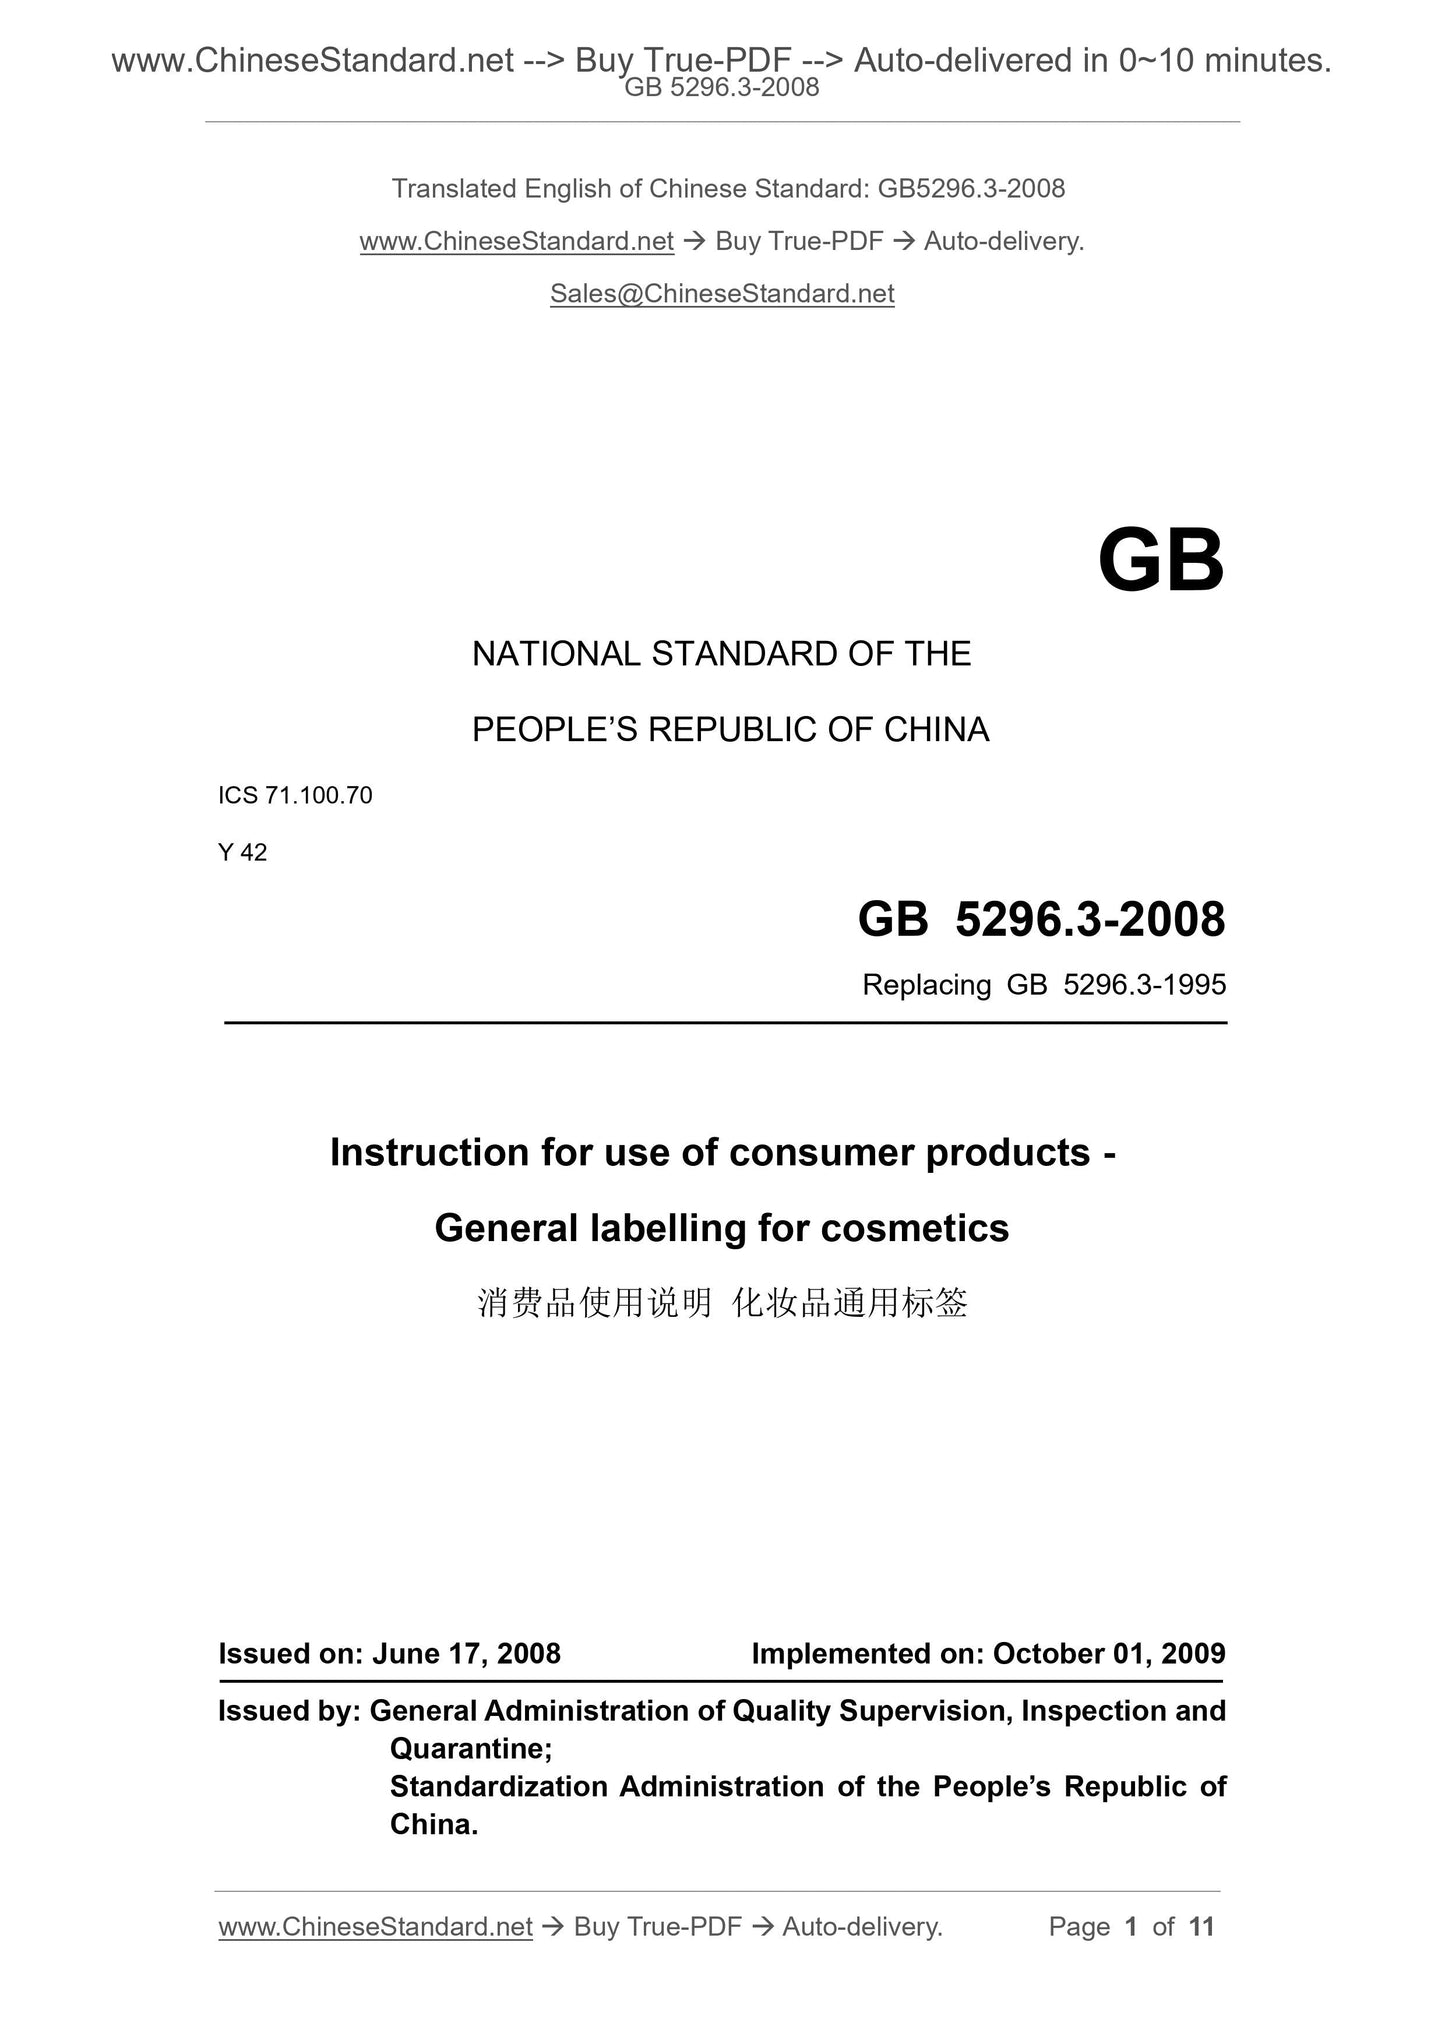 GB 5296.3-2008 Page 1